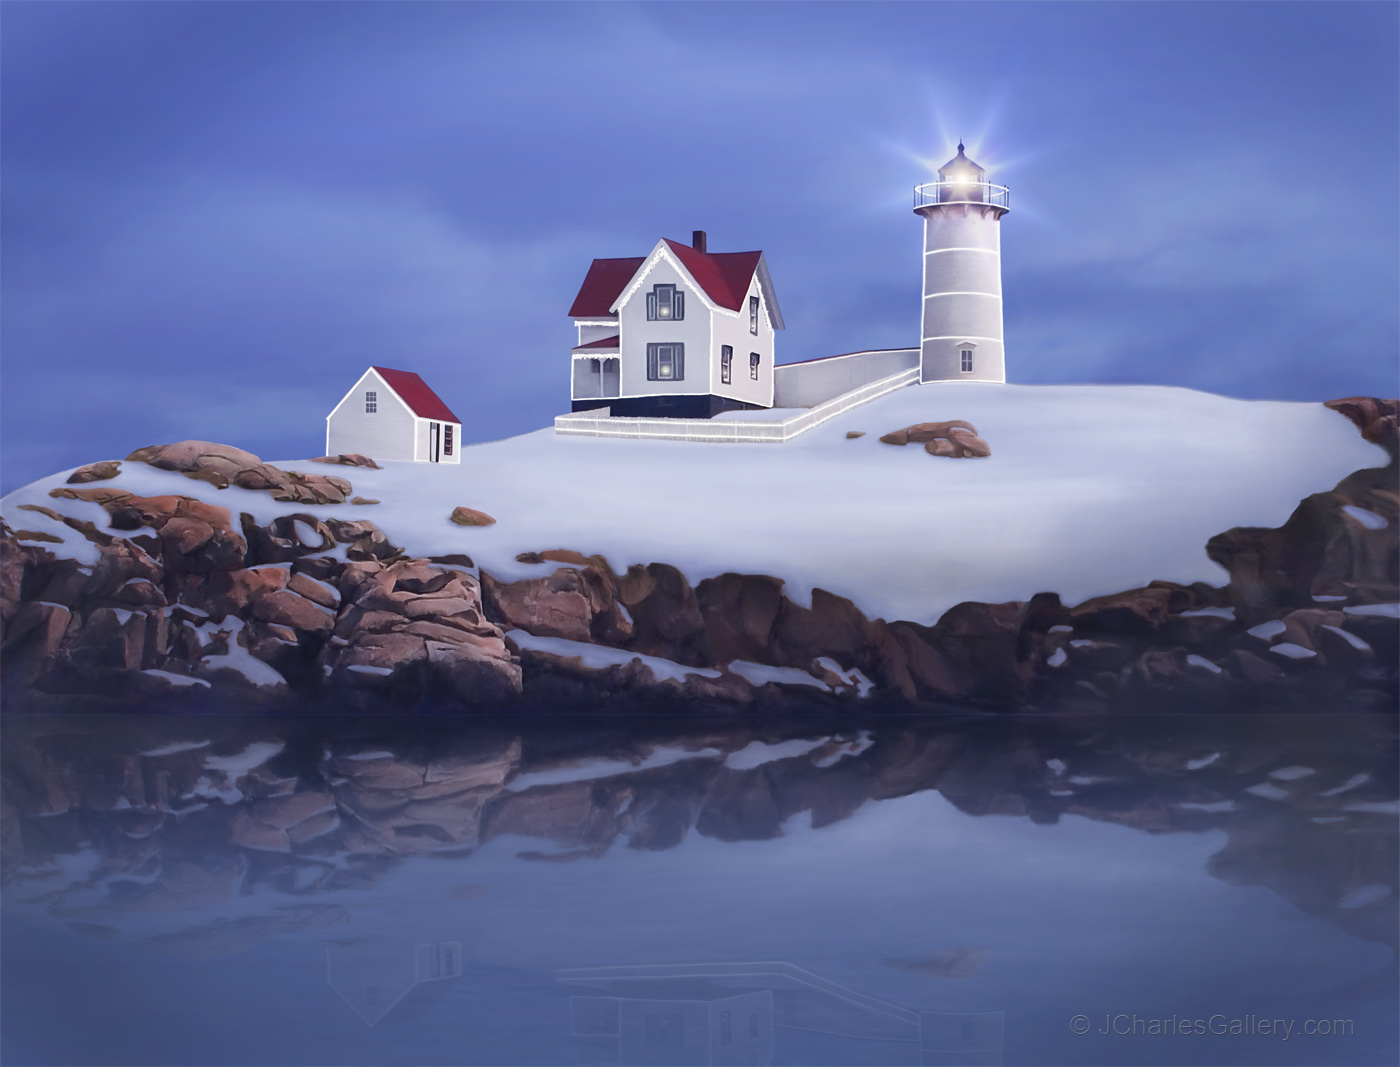 The Lighting of the Nubble painting by artist J. Charles features Maine